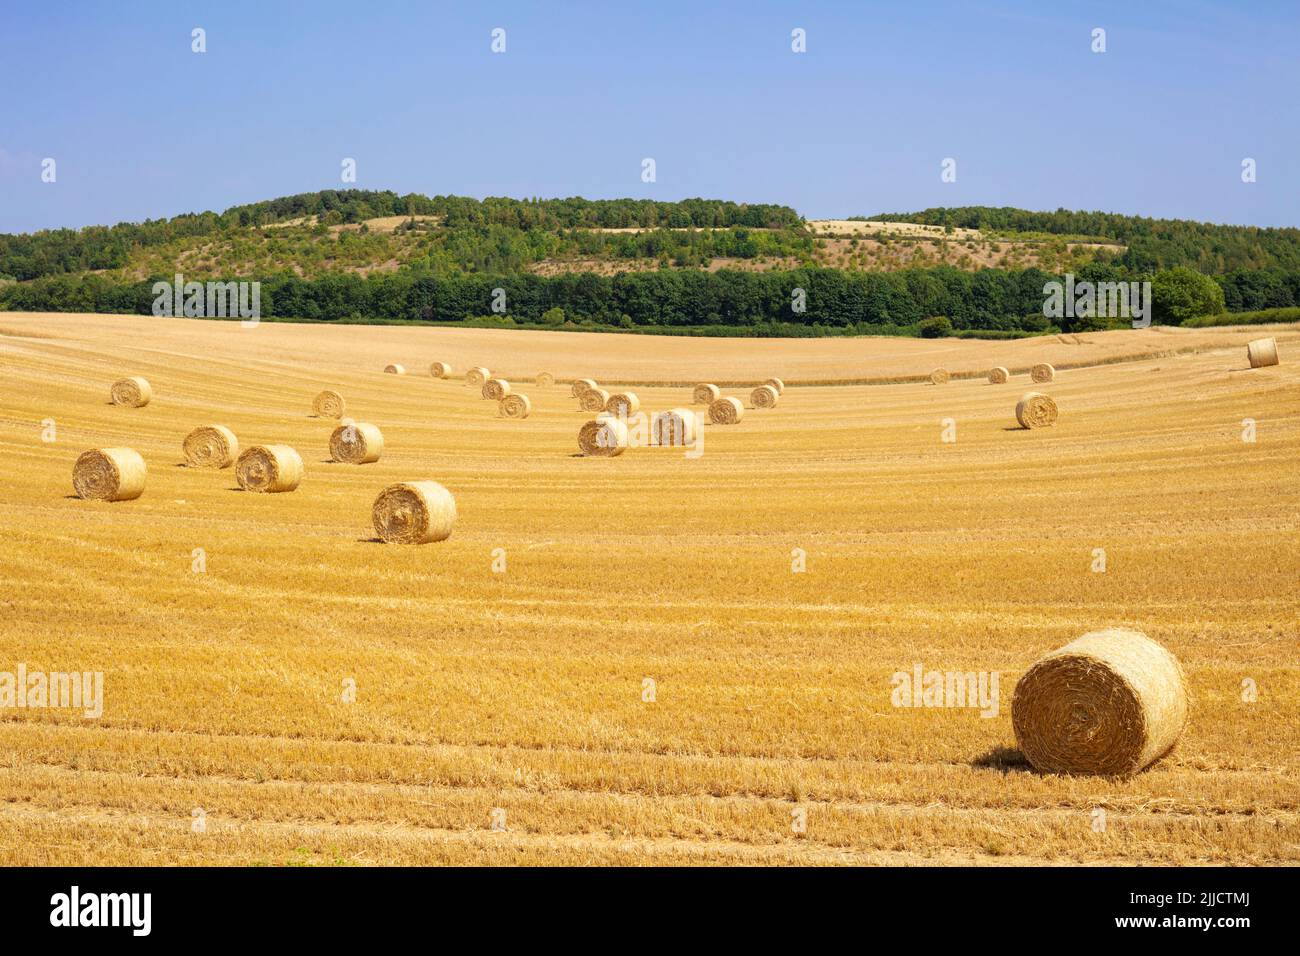 Hay bales uk summer - Rolls of straw bales - Rolled hay bales in a field after harvesting South Yorkshire England UK GB Europe Stock Photo